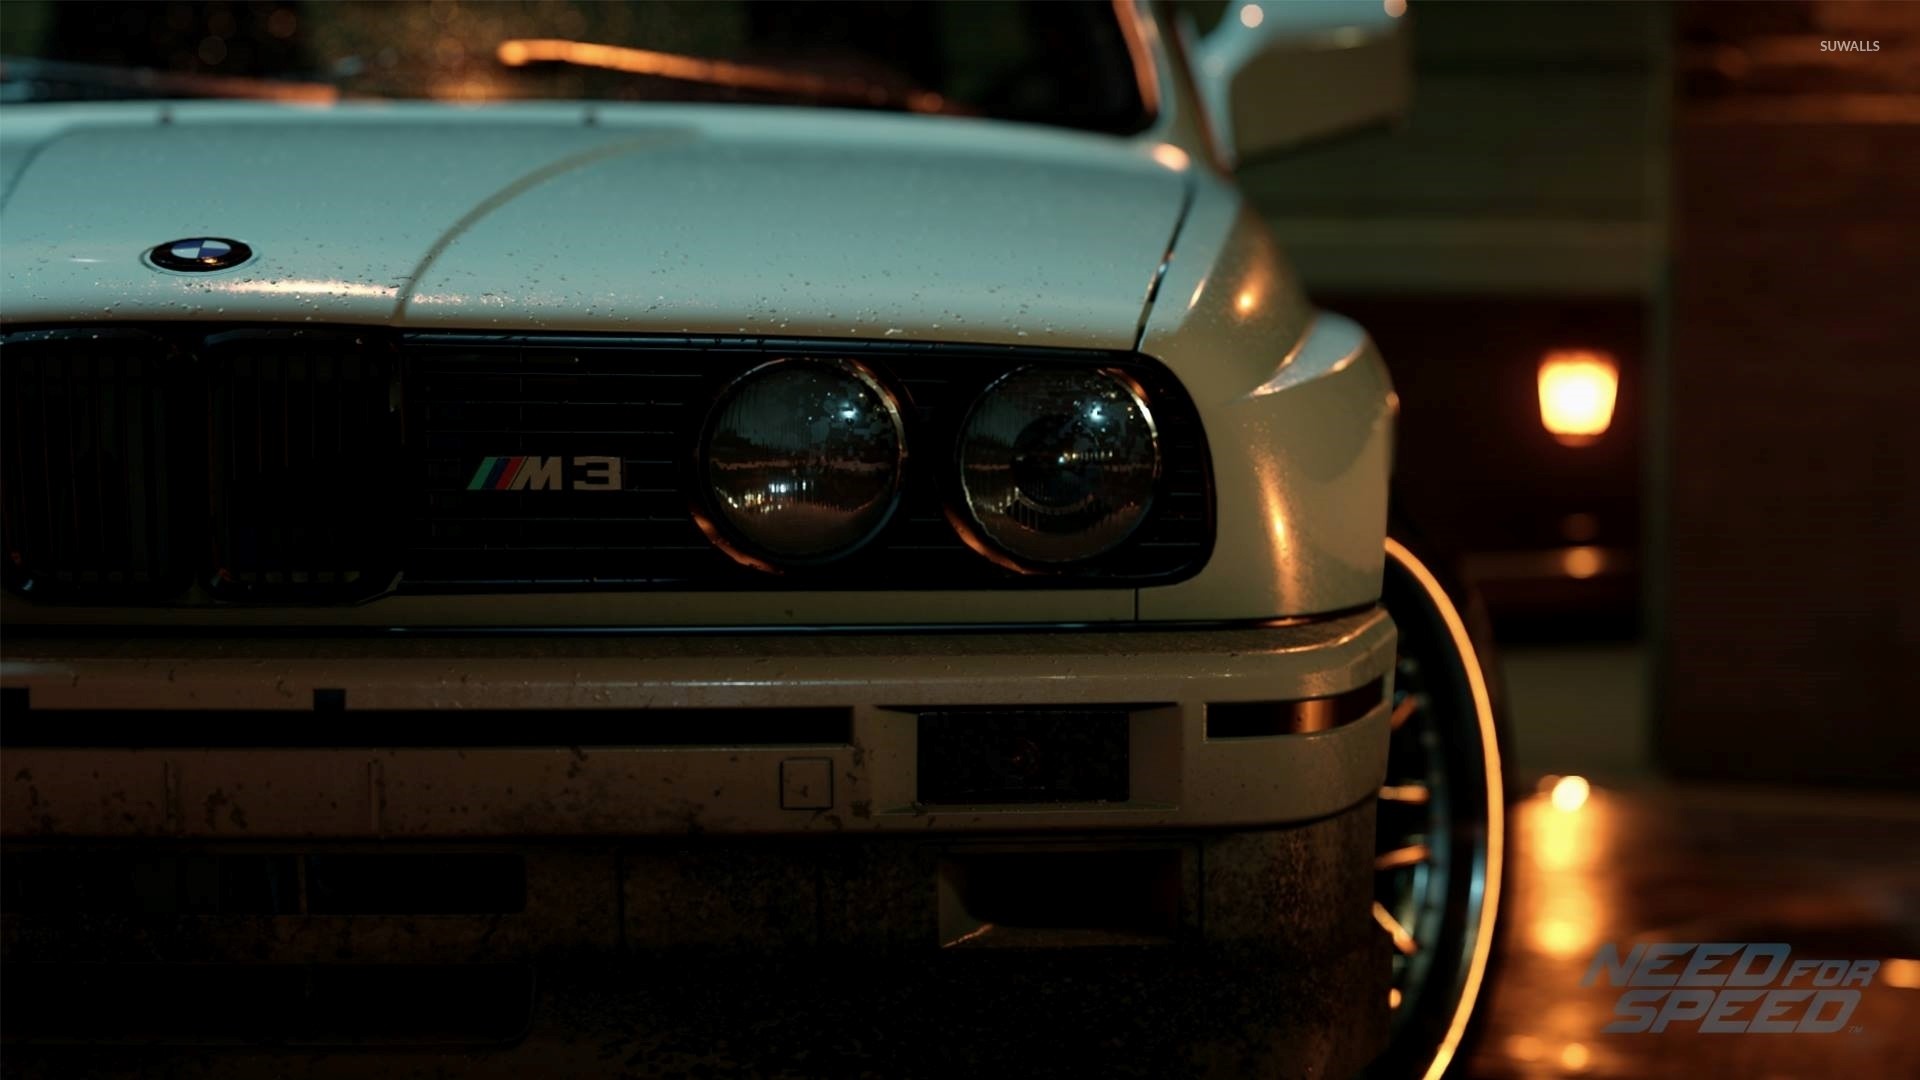 1920x1080 BMW M3 - Need for Speed wallpaper